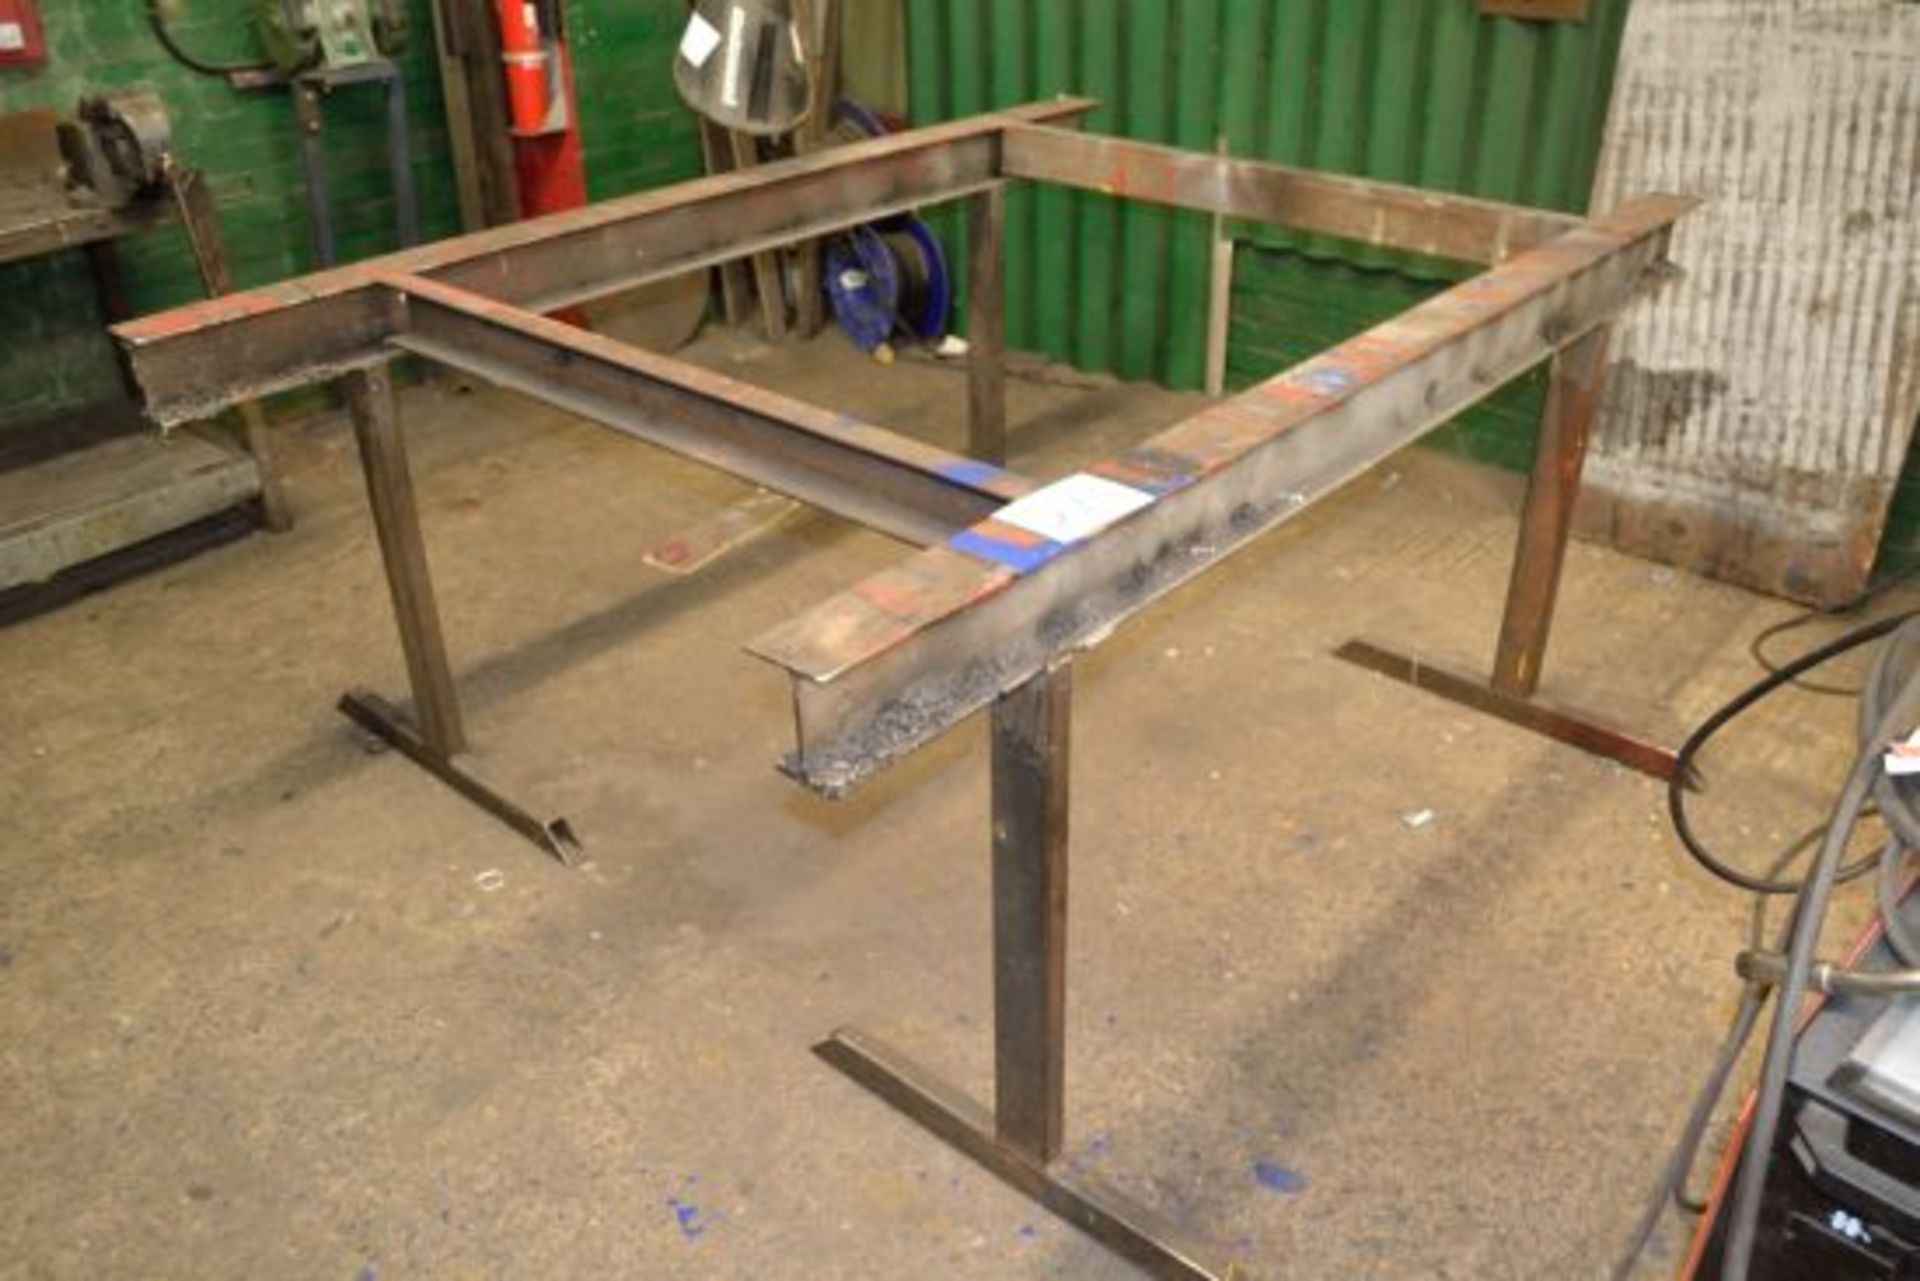 2 no. fabricated welding tables